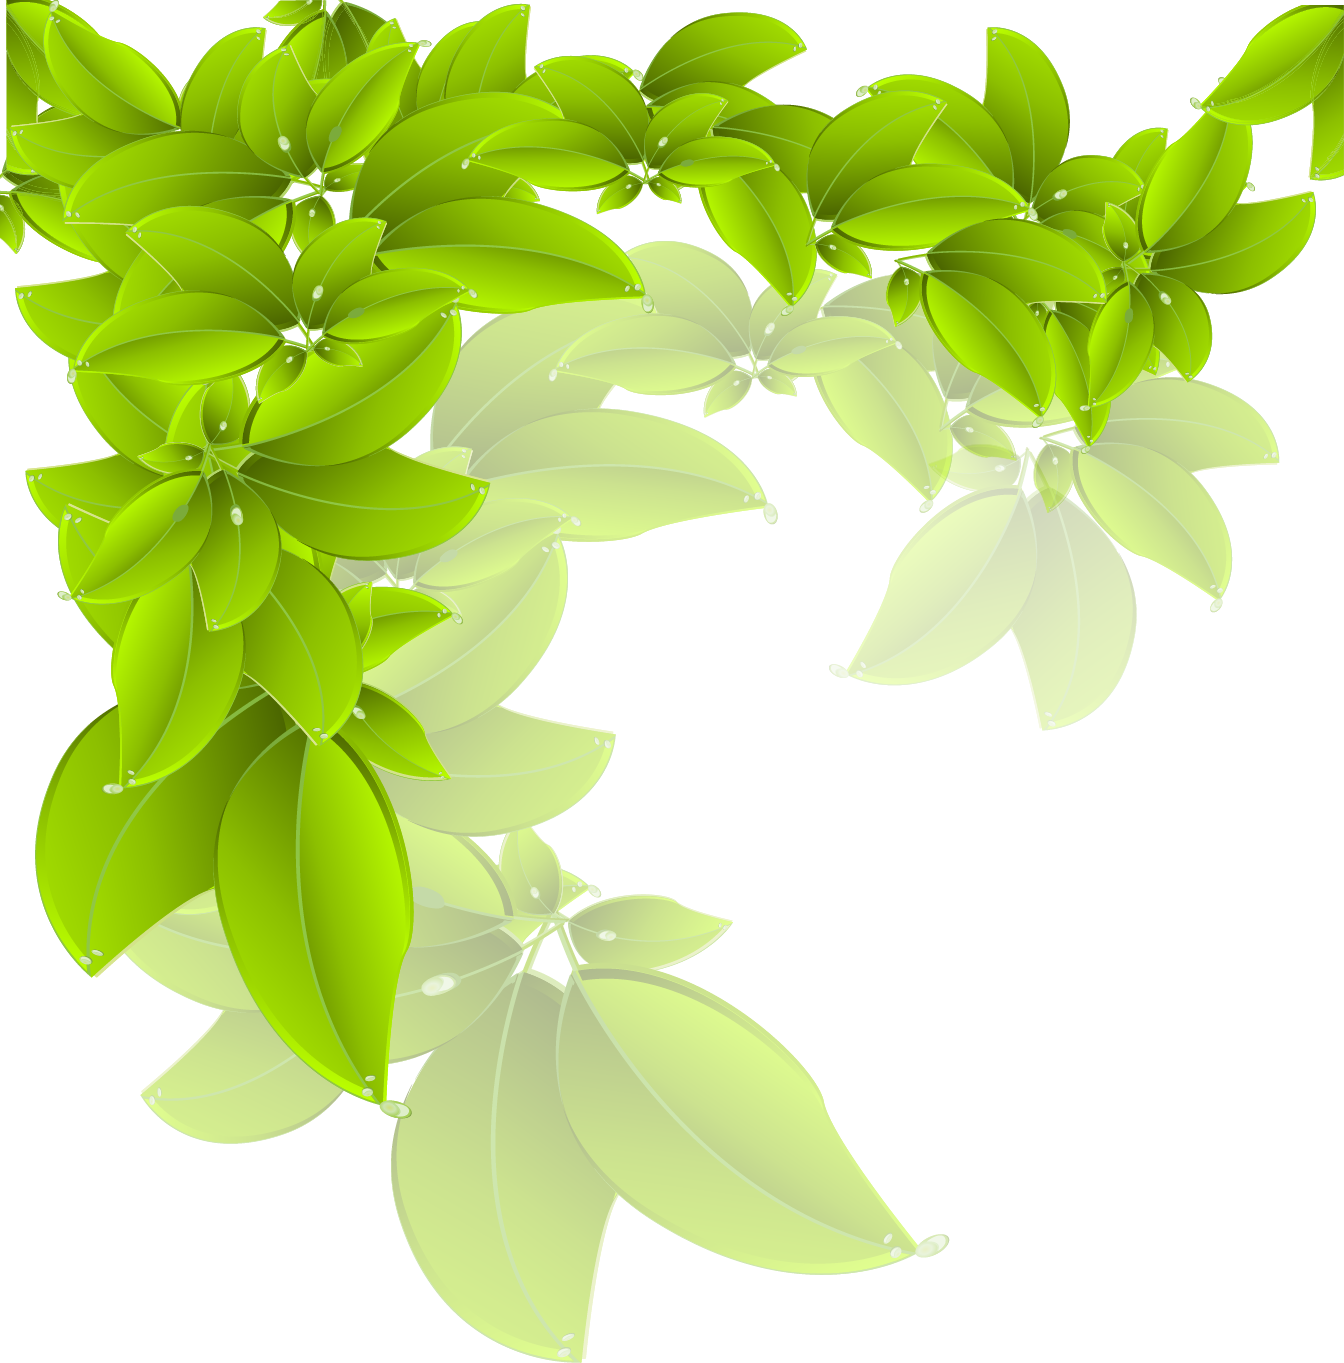 163 Background Green Leaves Images free Download - MyWeb